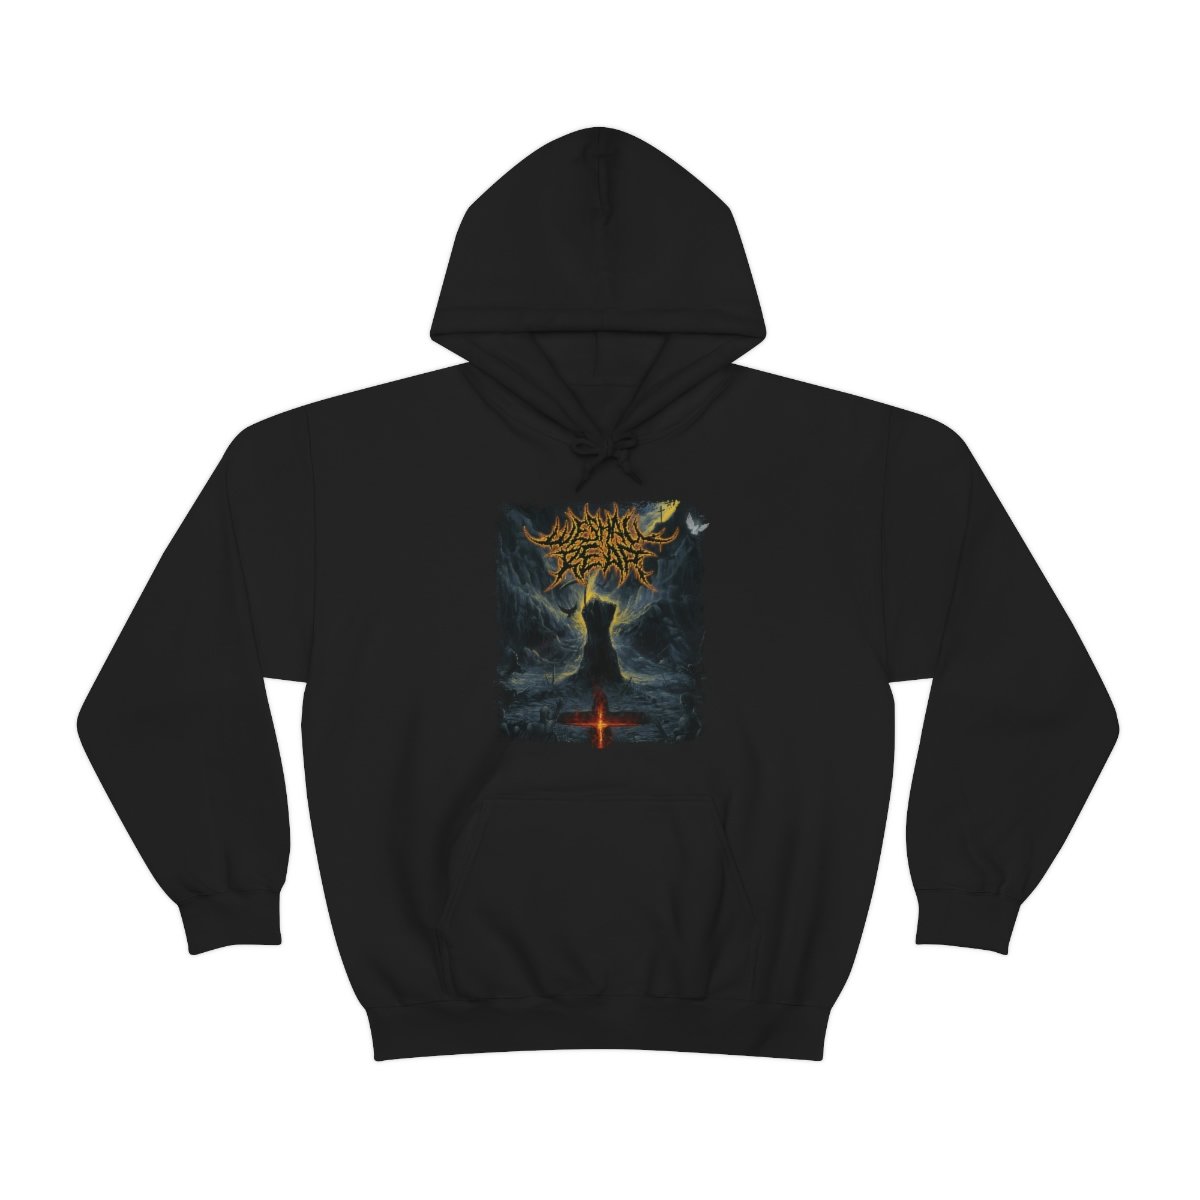 We Shall Reap Pullover Hooded Sweatshirt